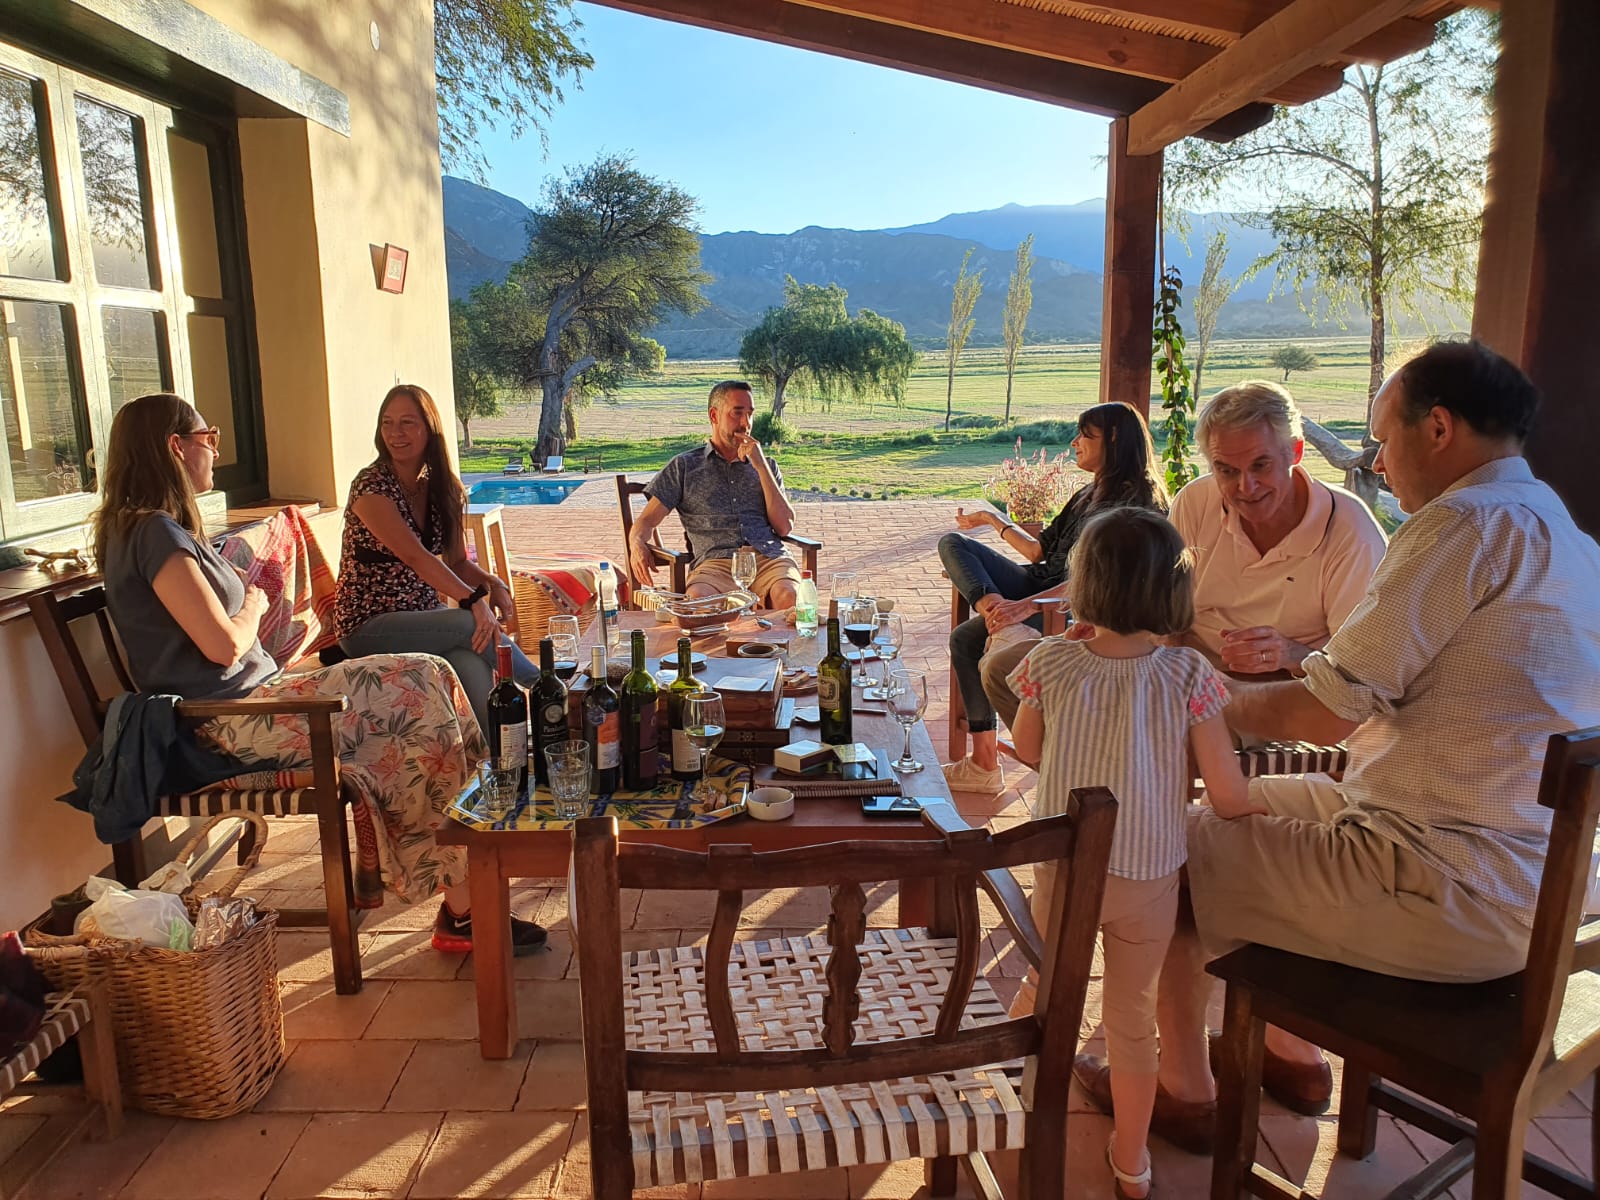 Staying at an Estancia is a very sociable experience, and lots of wine helps even more!